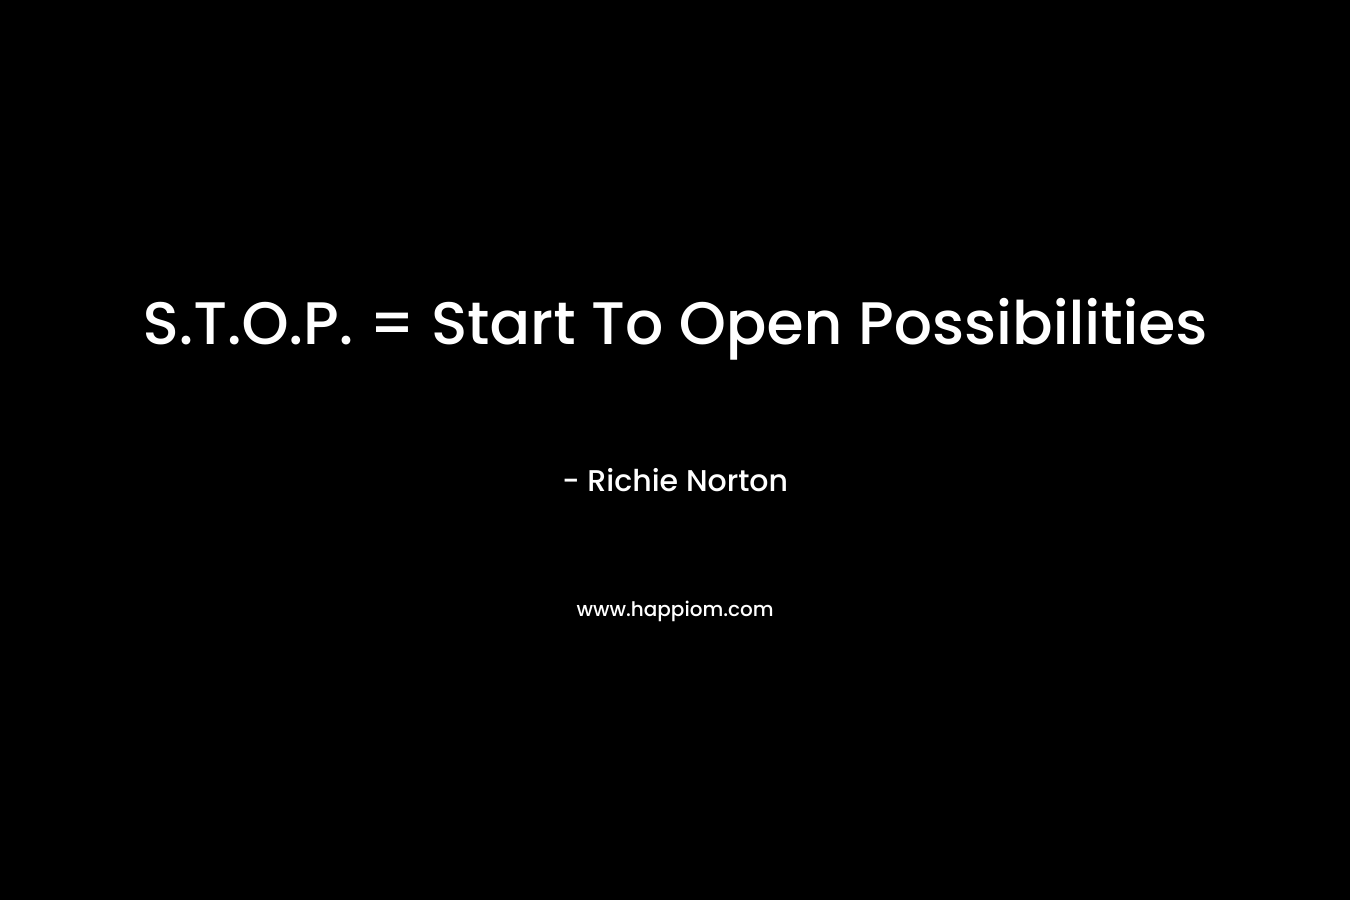 S.T.O.P. = Start To Open Possibilities